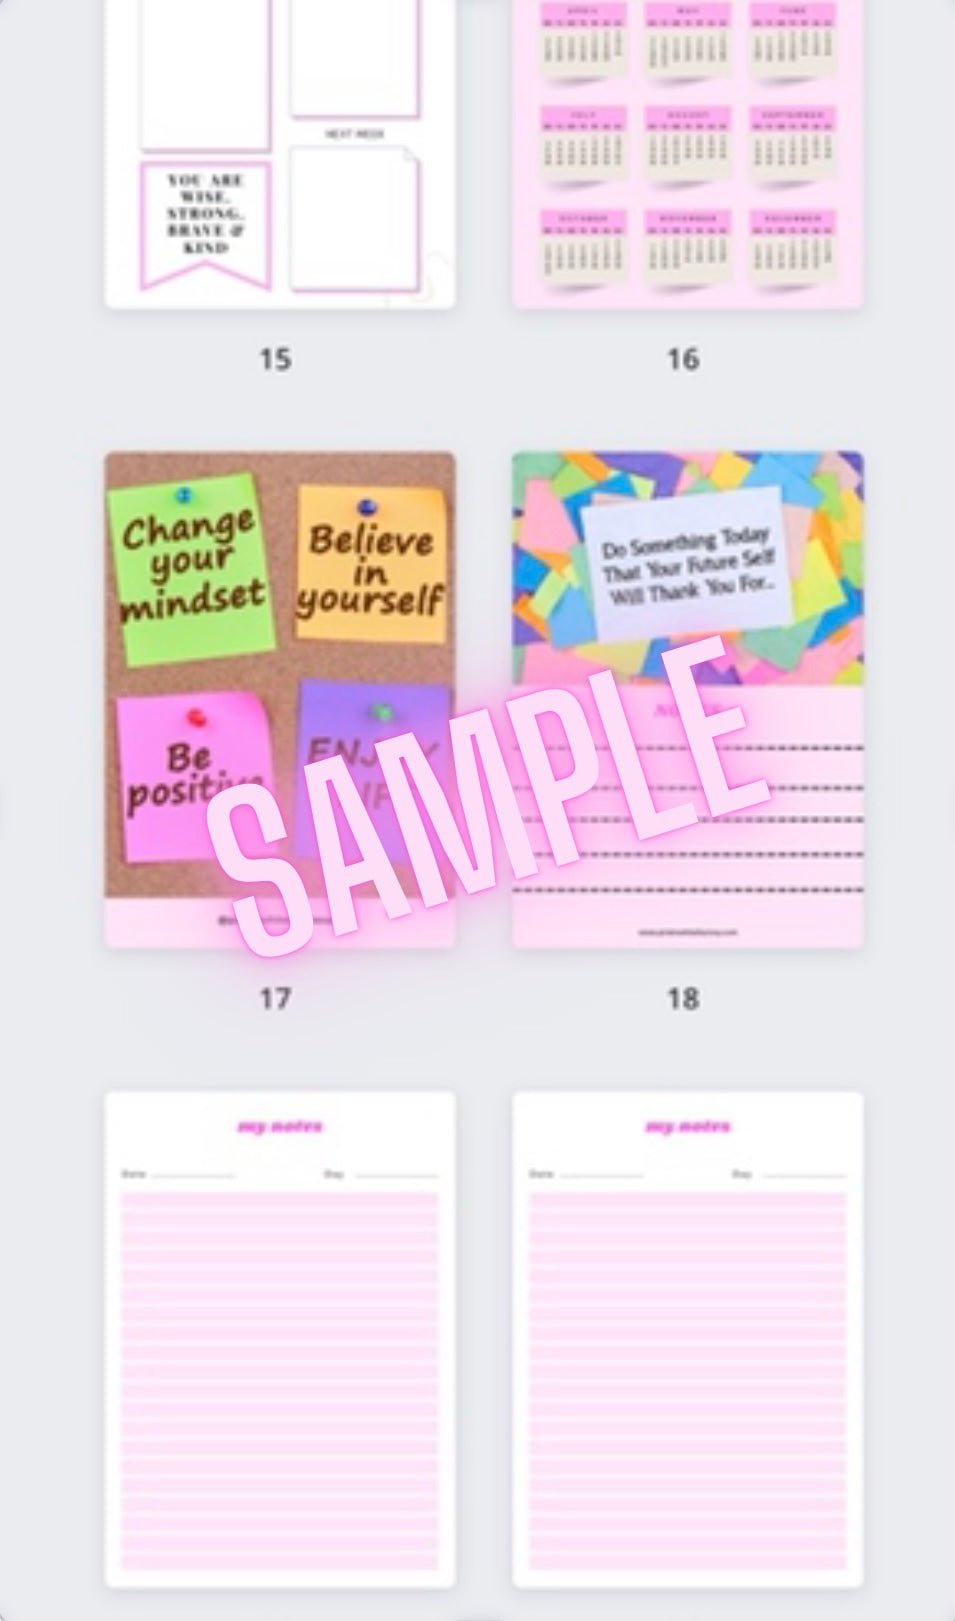 2022 Boss Babe Vision Board Planner - 20 printable pages - Pink N White Factory